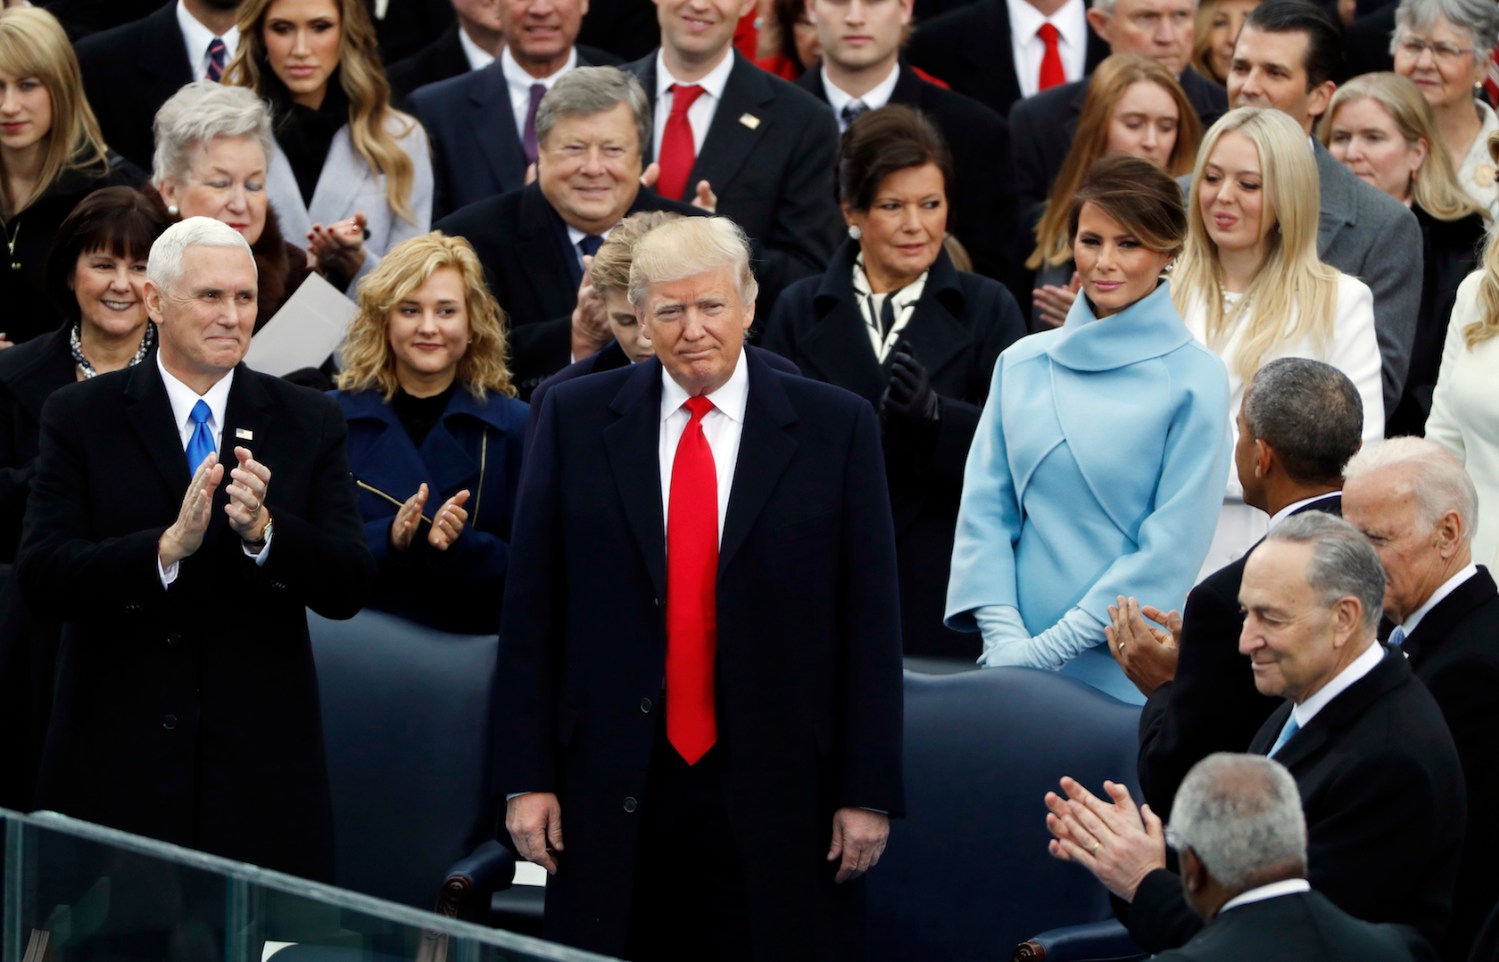 Donald Trump receives applause during his inauguration ceremonies to be sworn in as the 45th president of the United States at the U.S. Capitol in Washington, U.S., January 20, 2017. REUTERS/Lucy Nicholson - RTSWI5P